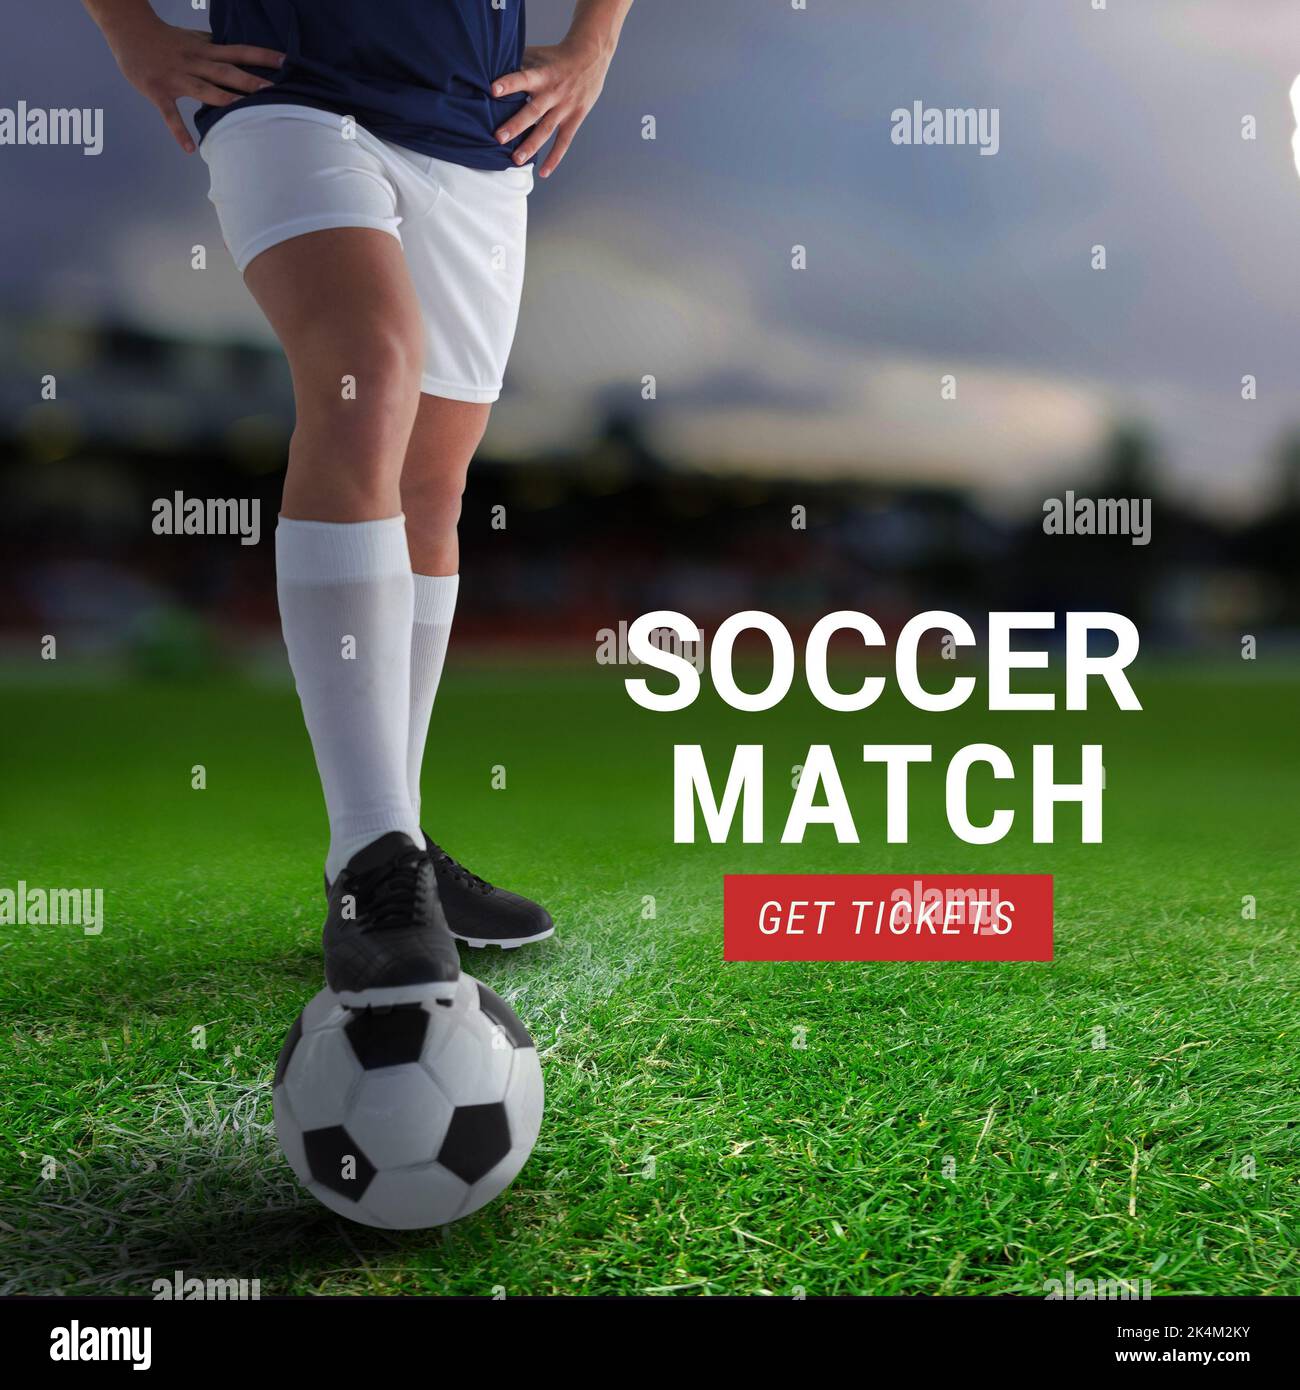 Composition of soccer match get tickets text and footballer with football on pitch Stock Photo